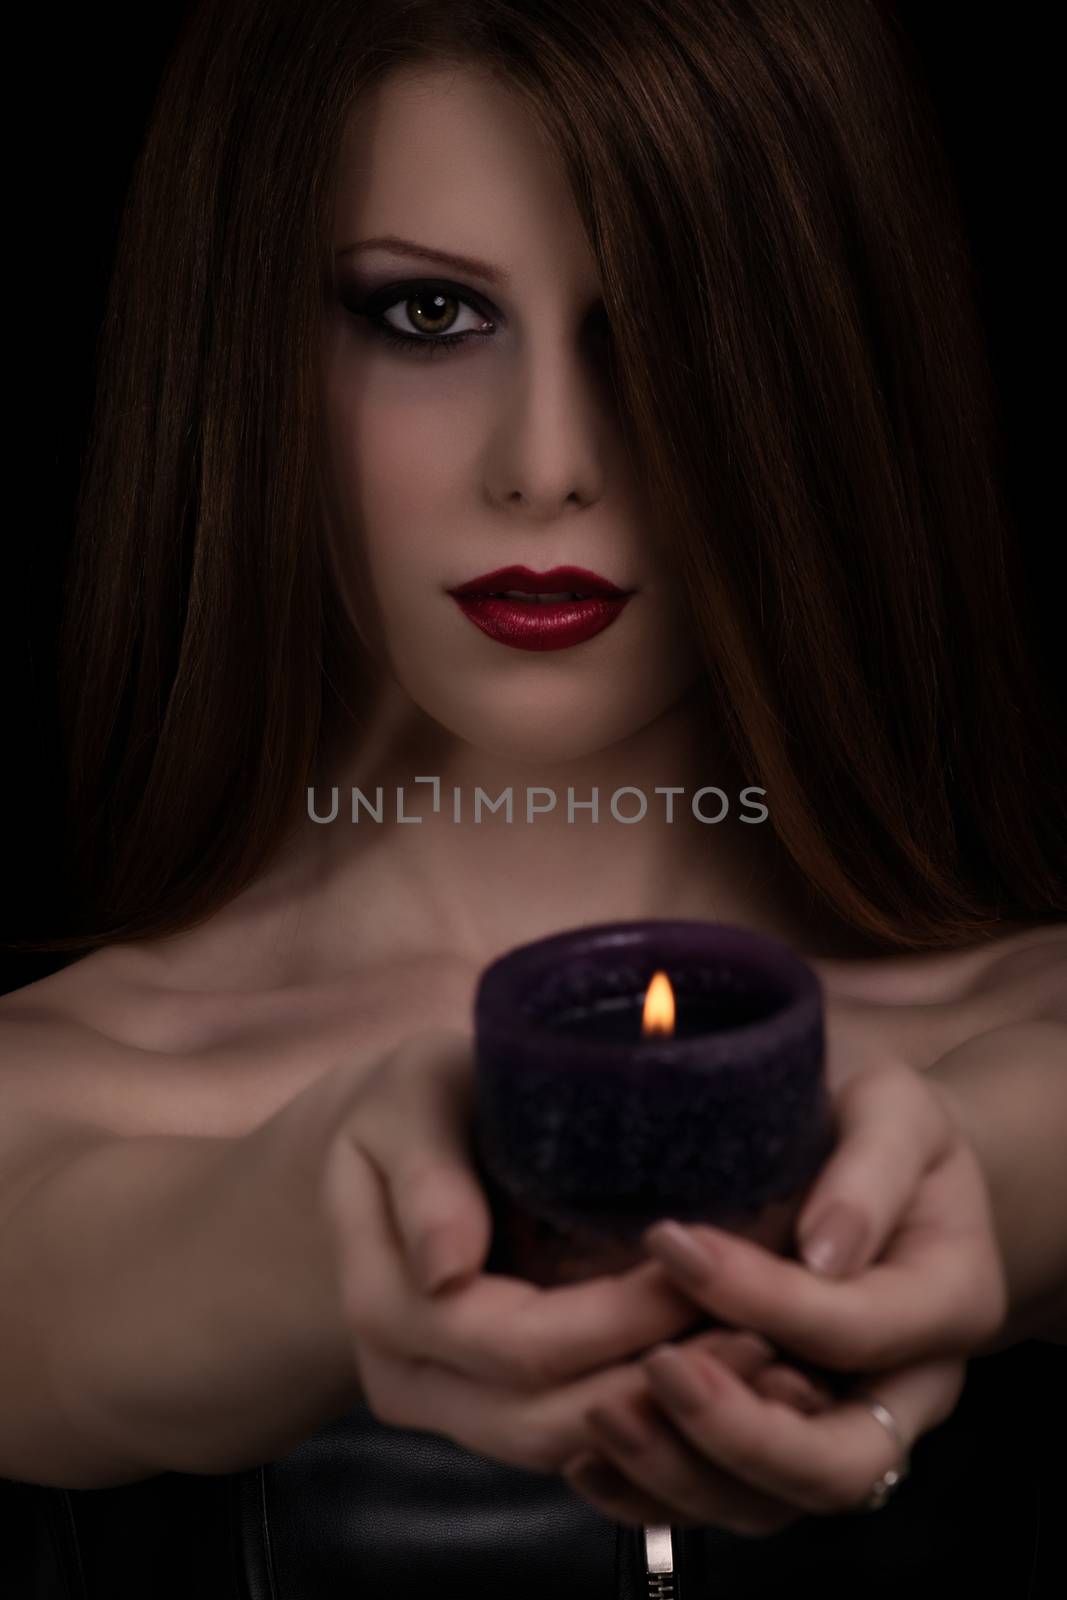 Low key portrait of a mystical beautiful goth girl holding a candle, isolated on black background.